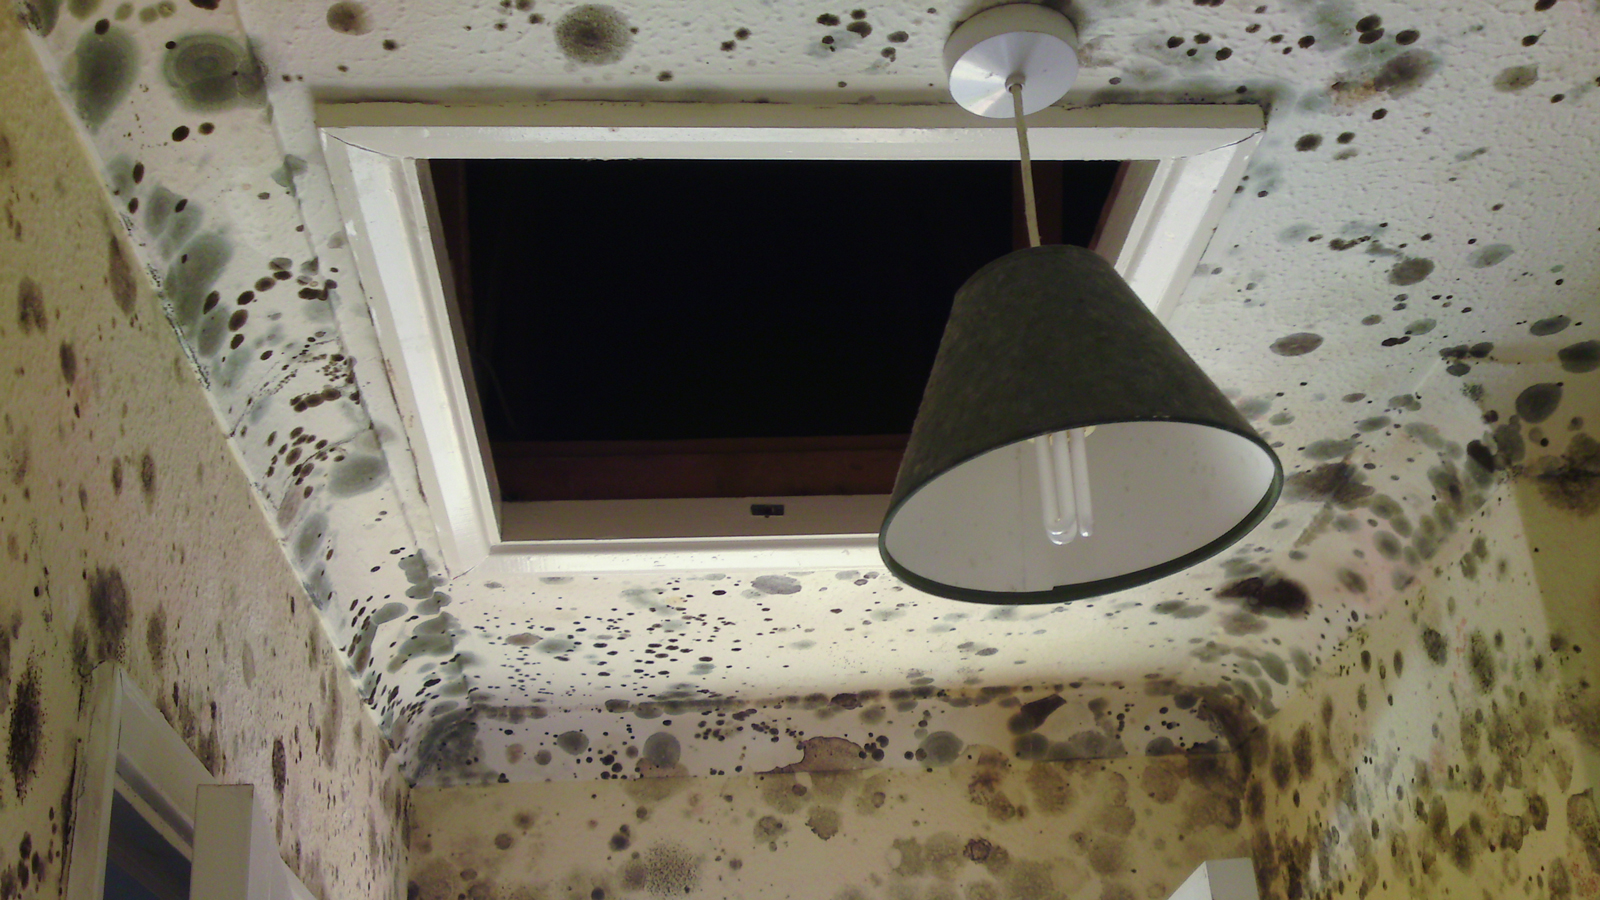 black mold caused by